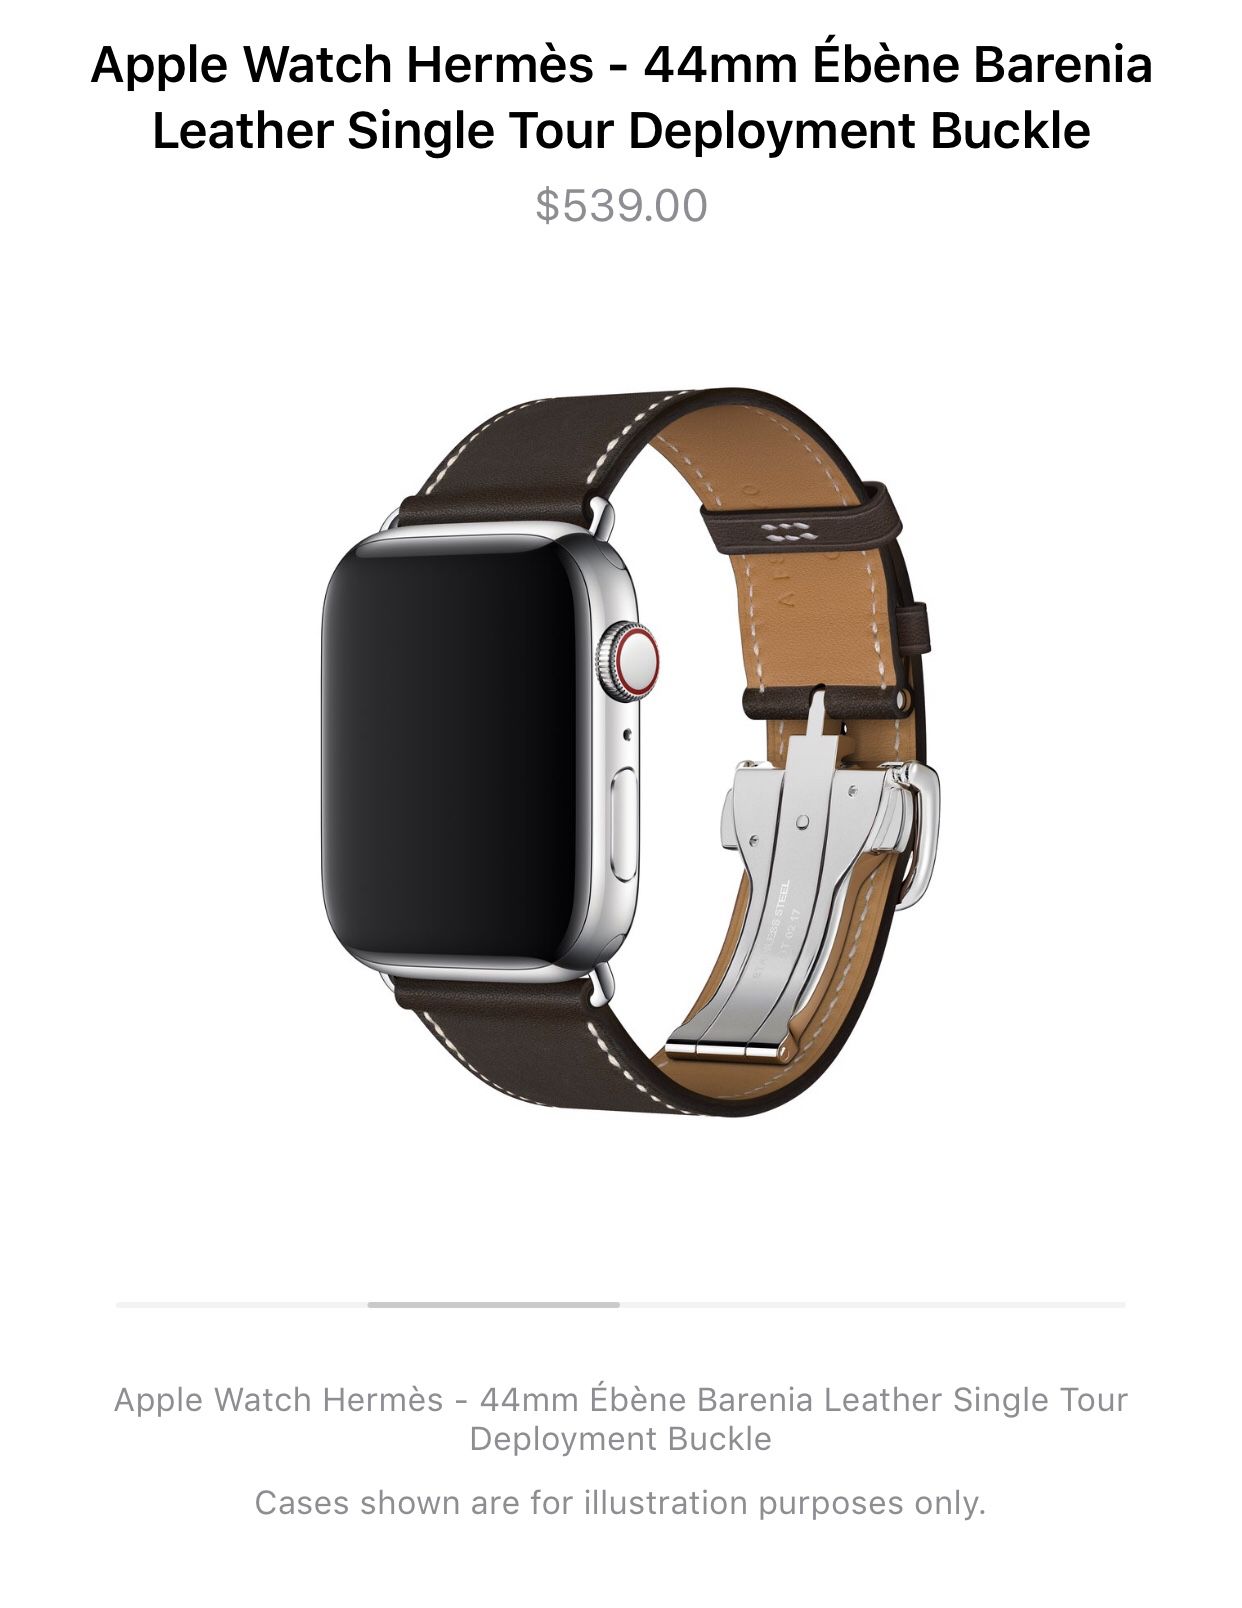 Apple watch band Hermes 44mm ebene barenia leather for Sale in